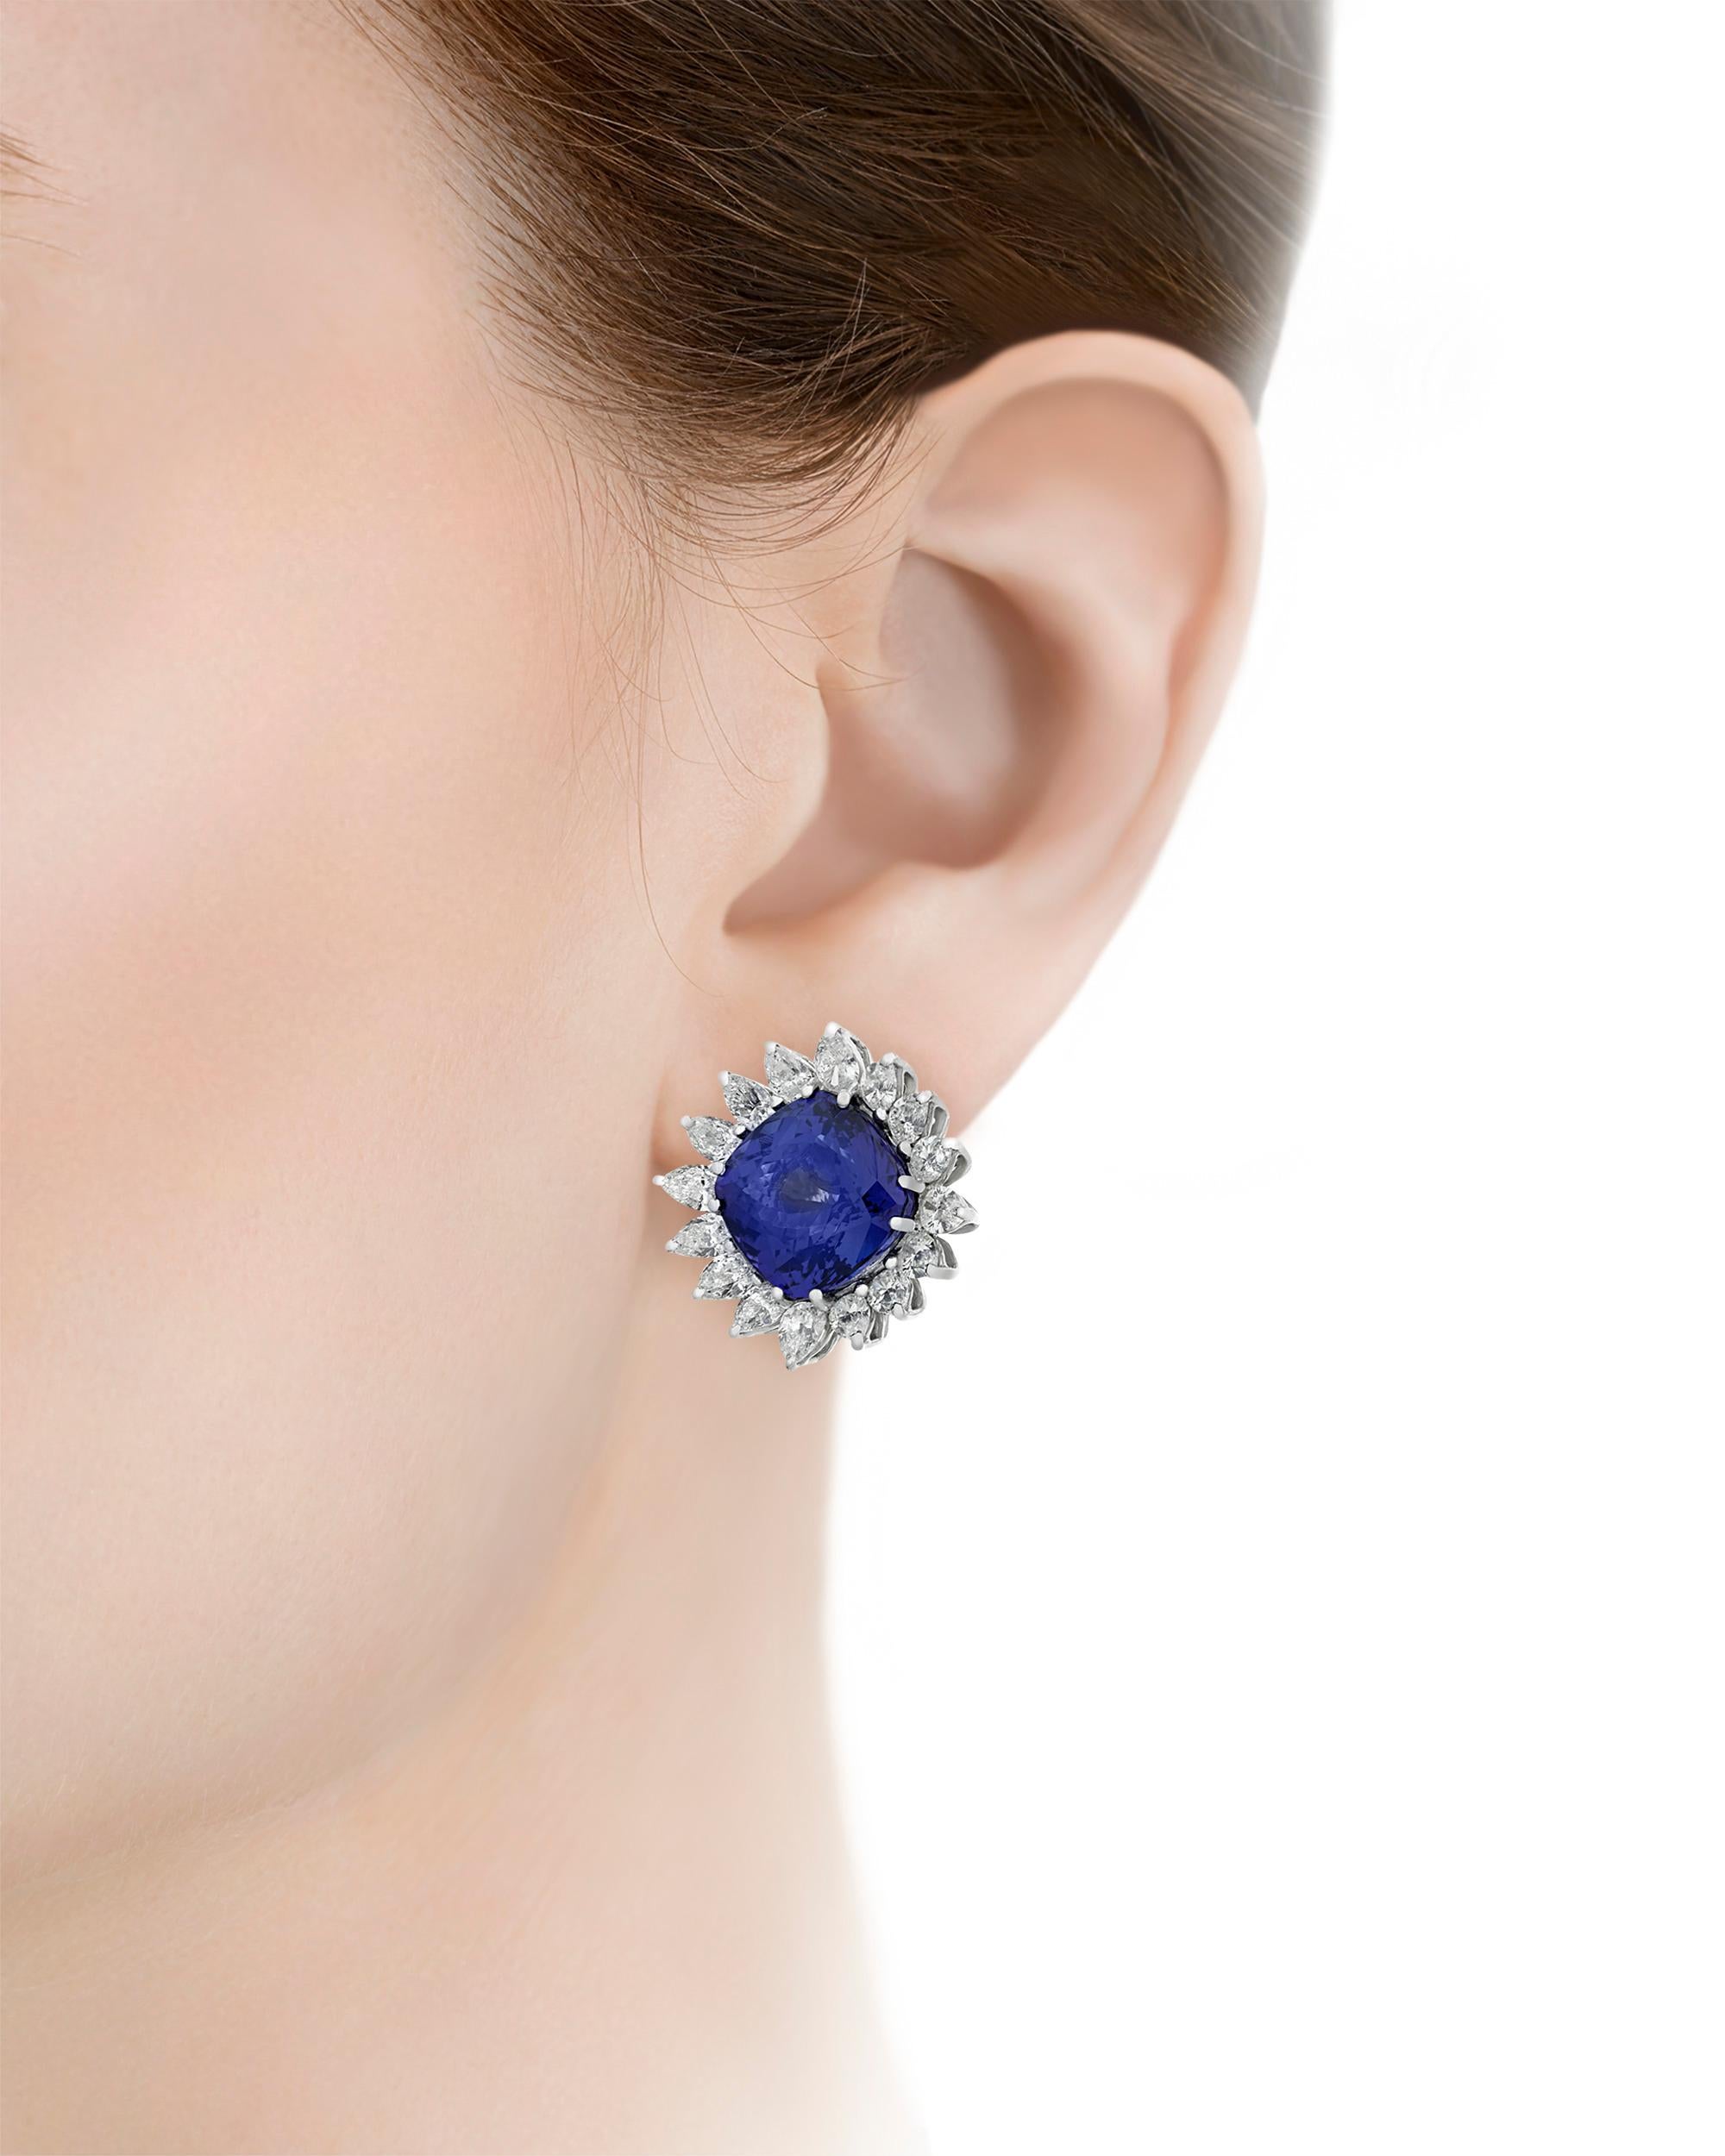 Possessing an entrancing deep blue hue, two extraordinary tanzanites are elegantly displayed within these classic earrings. The cushion-cut jewels are perfectly matched in cut, color, and size, with the pair totaling 17.92 carats. White diamonds